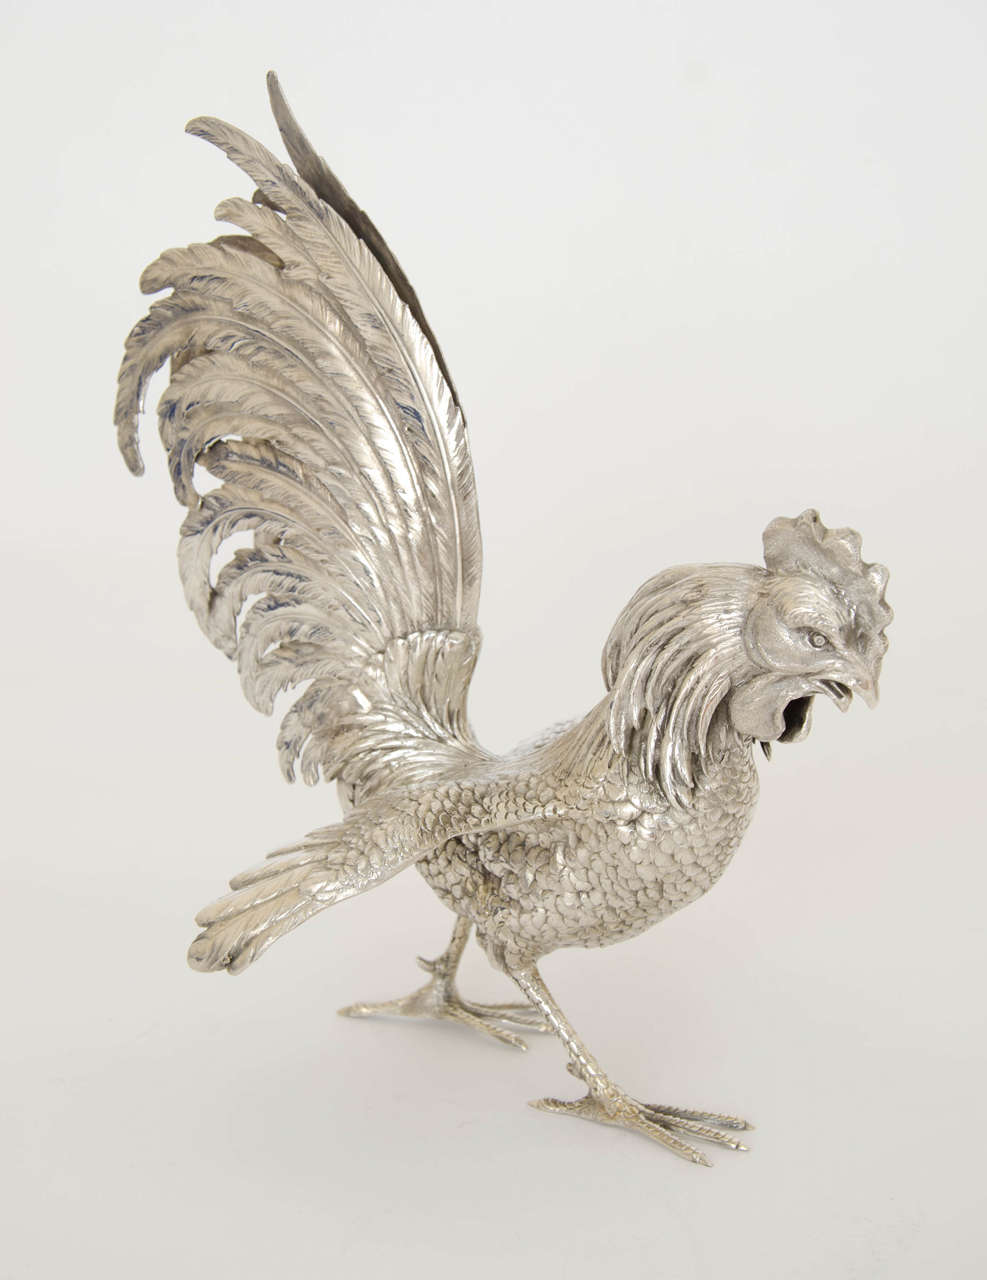 A lovely pair of German Silver 800 standard fighting cocks made c 1910 by Jean L  Schlingloff of Hanau. The birds are realistic fighting poses and will make a wonderful conversation piece on any dining table or displayed anywhere. Height of one bird